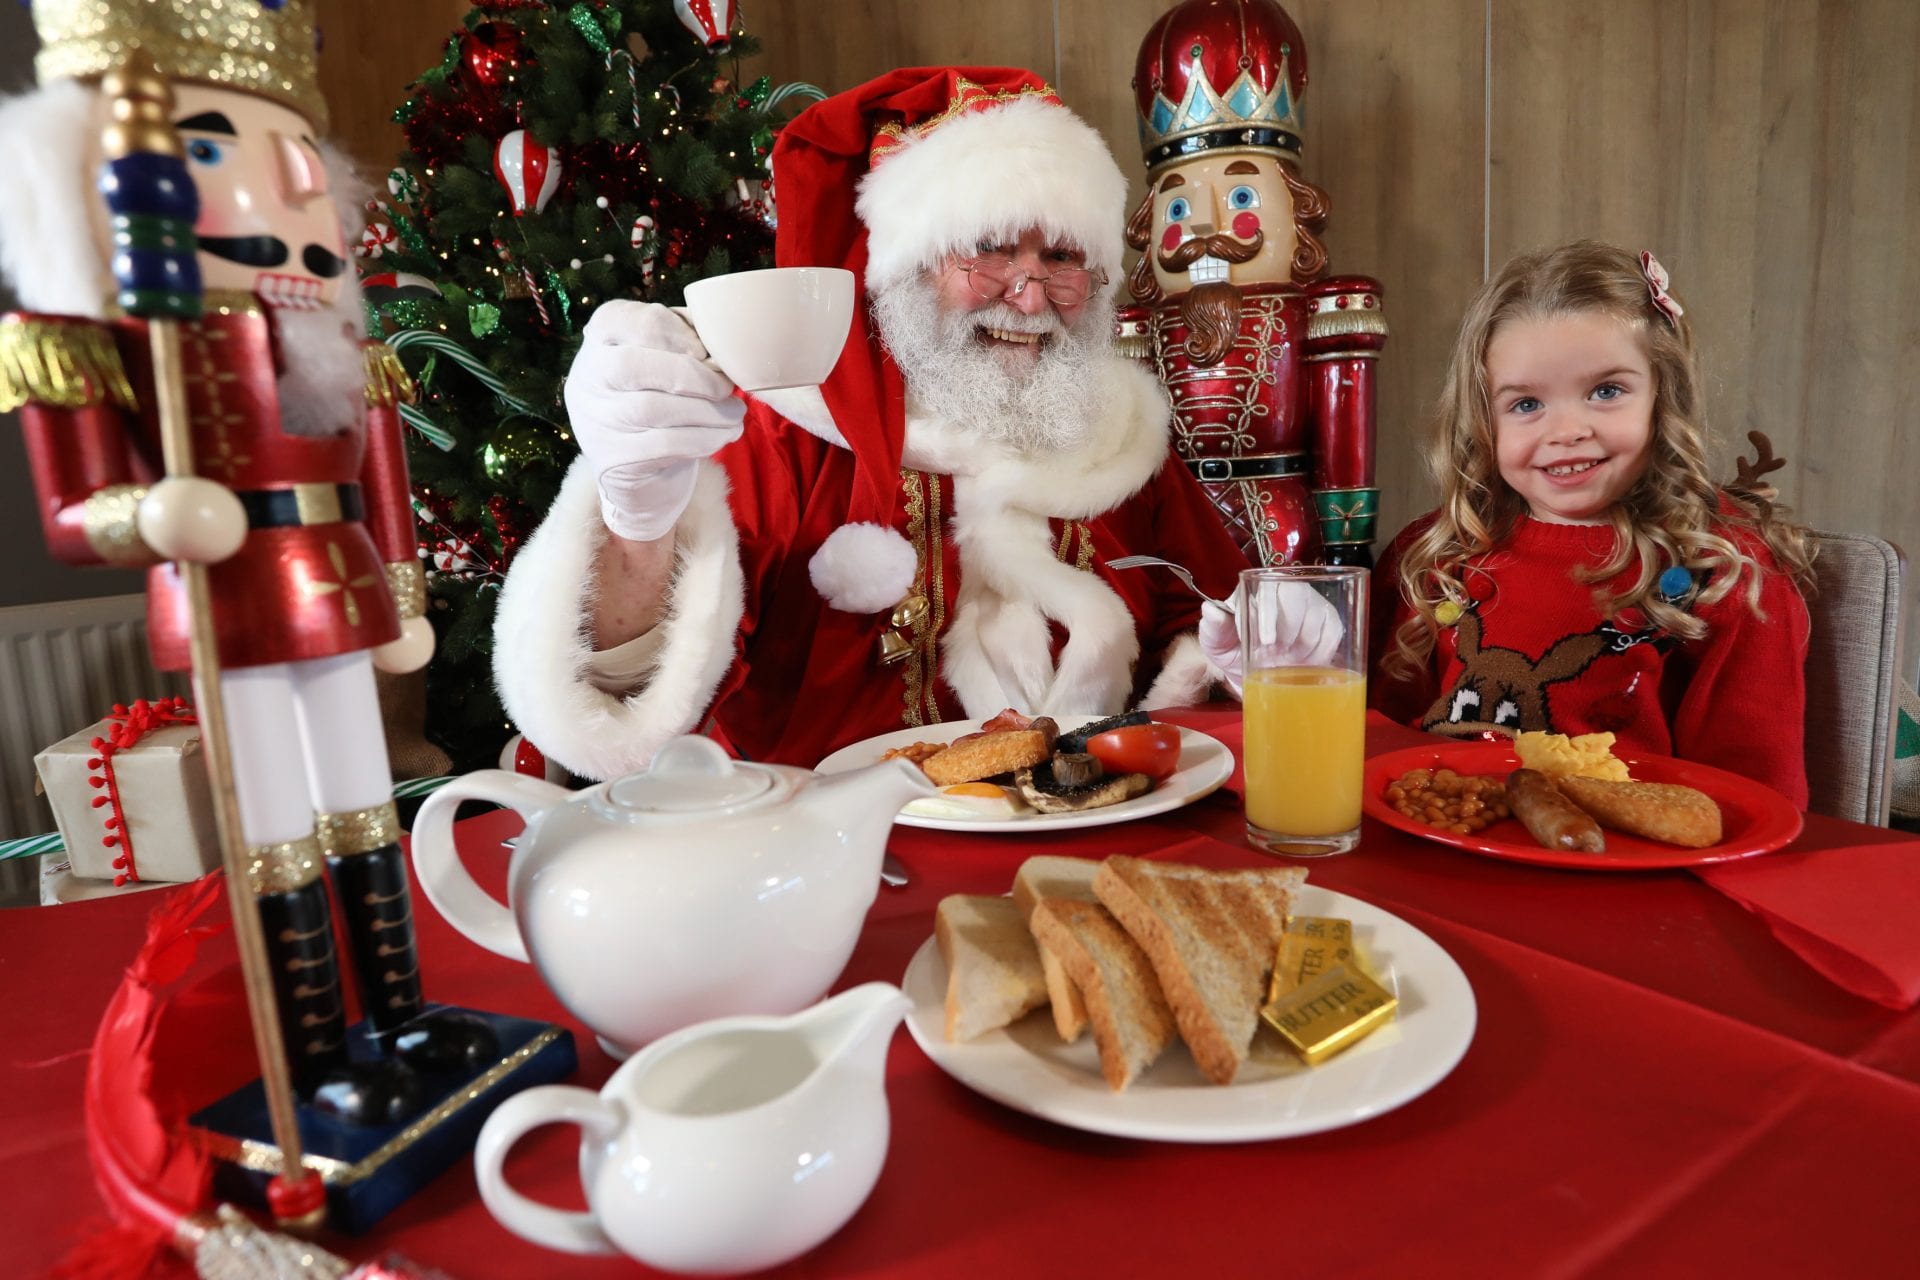 You can have breakfast with Santa at Dobbies in Speke this Christmas